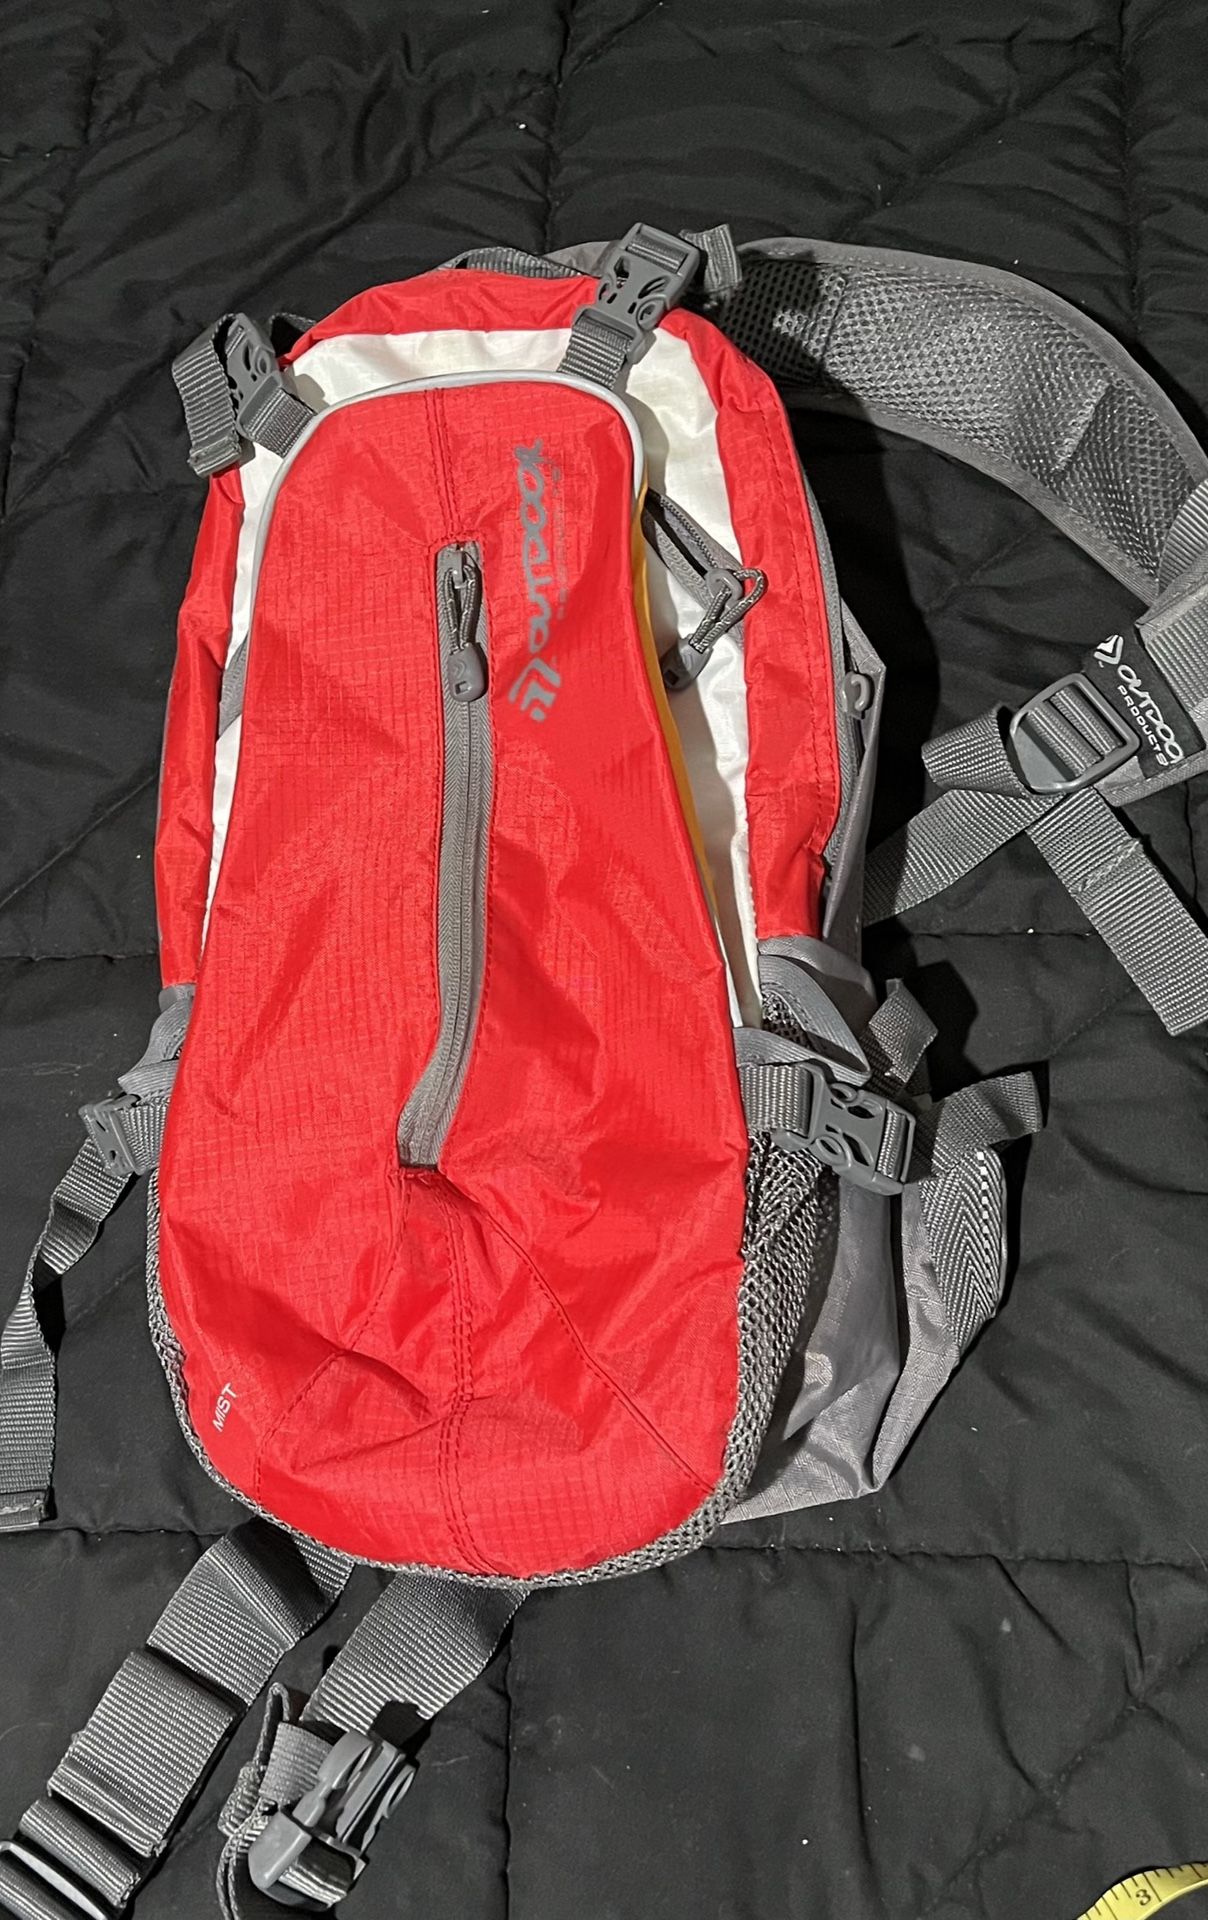 Outdoors Hydration Hiking Backpack - 2L